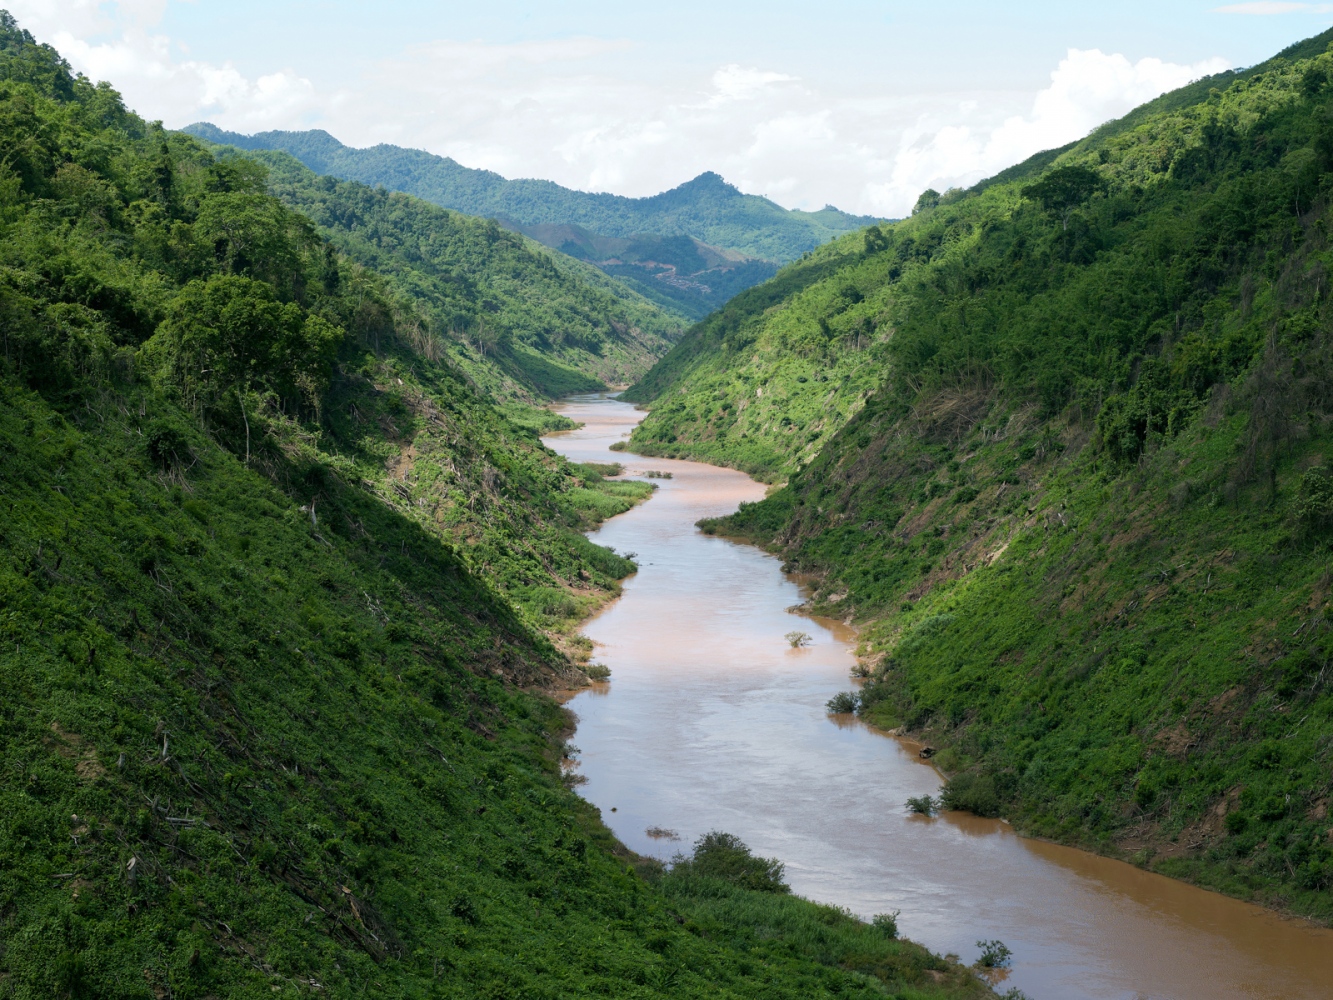  View of the Nam Ou river in Phongsaly province during the dry season, Lao PDR. The 425 km long Nam Ou river is a major tributary of the Mekong and...